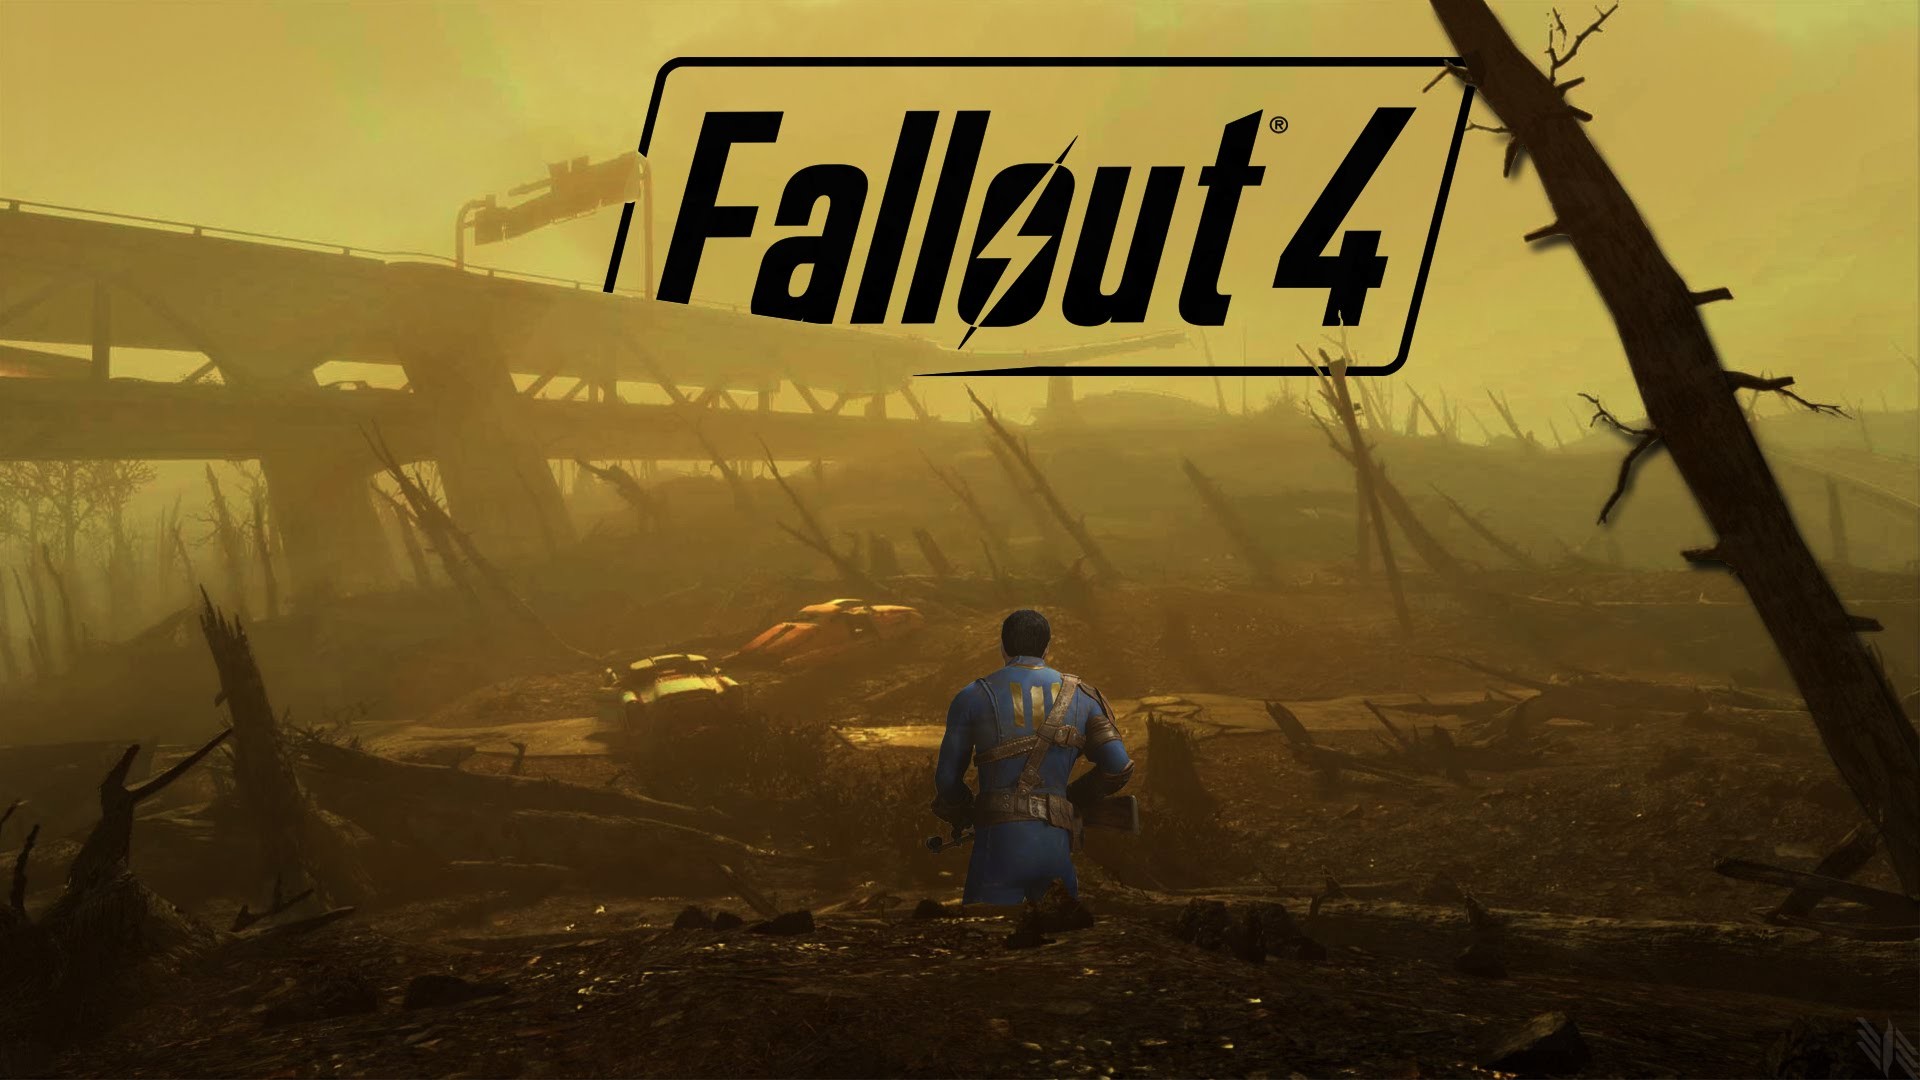 Fallout 4 wallpapers 4k фото 55